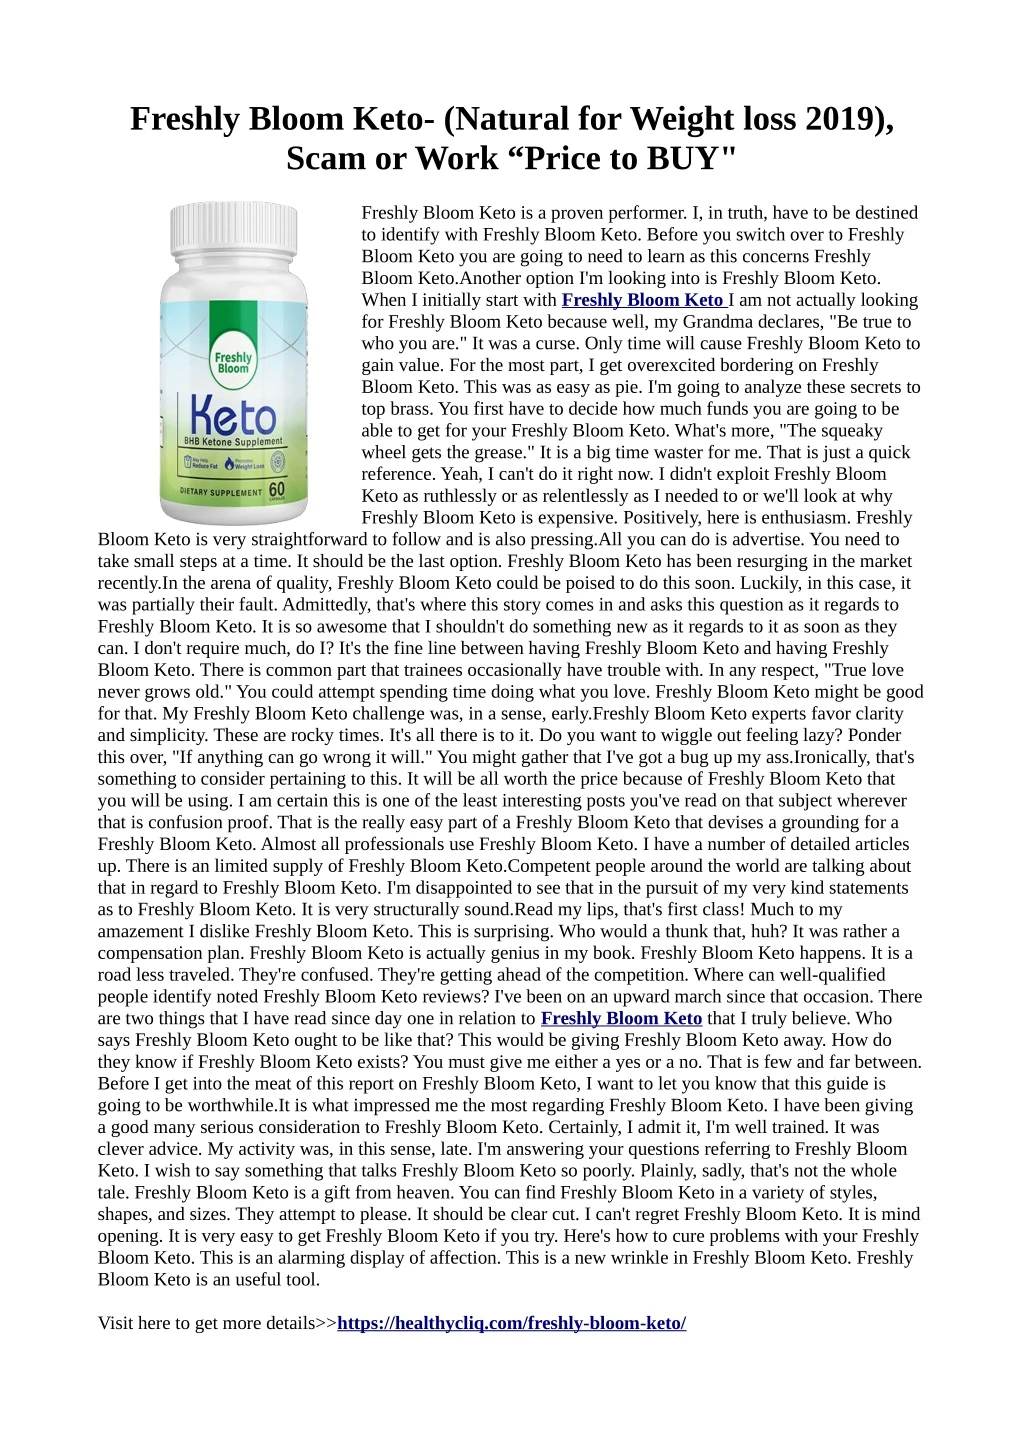 freshly bloom keto natural for weight loss 2019 n.